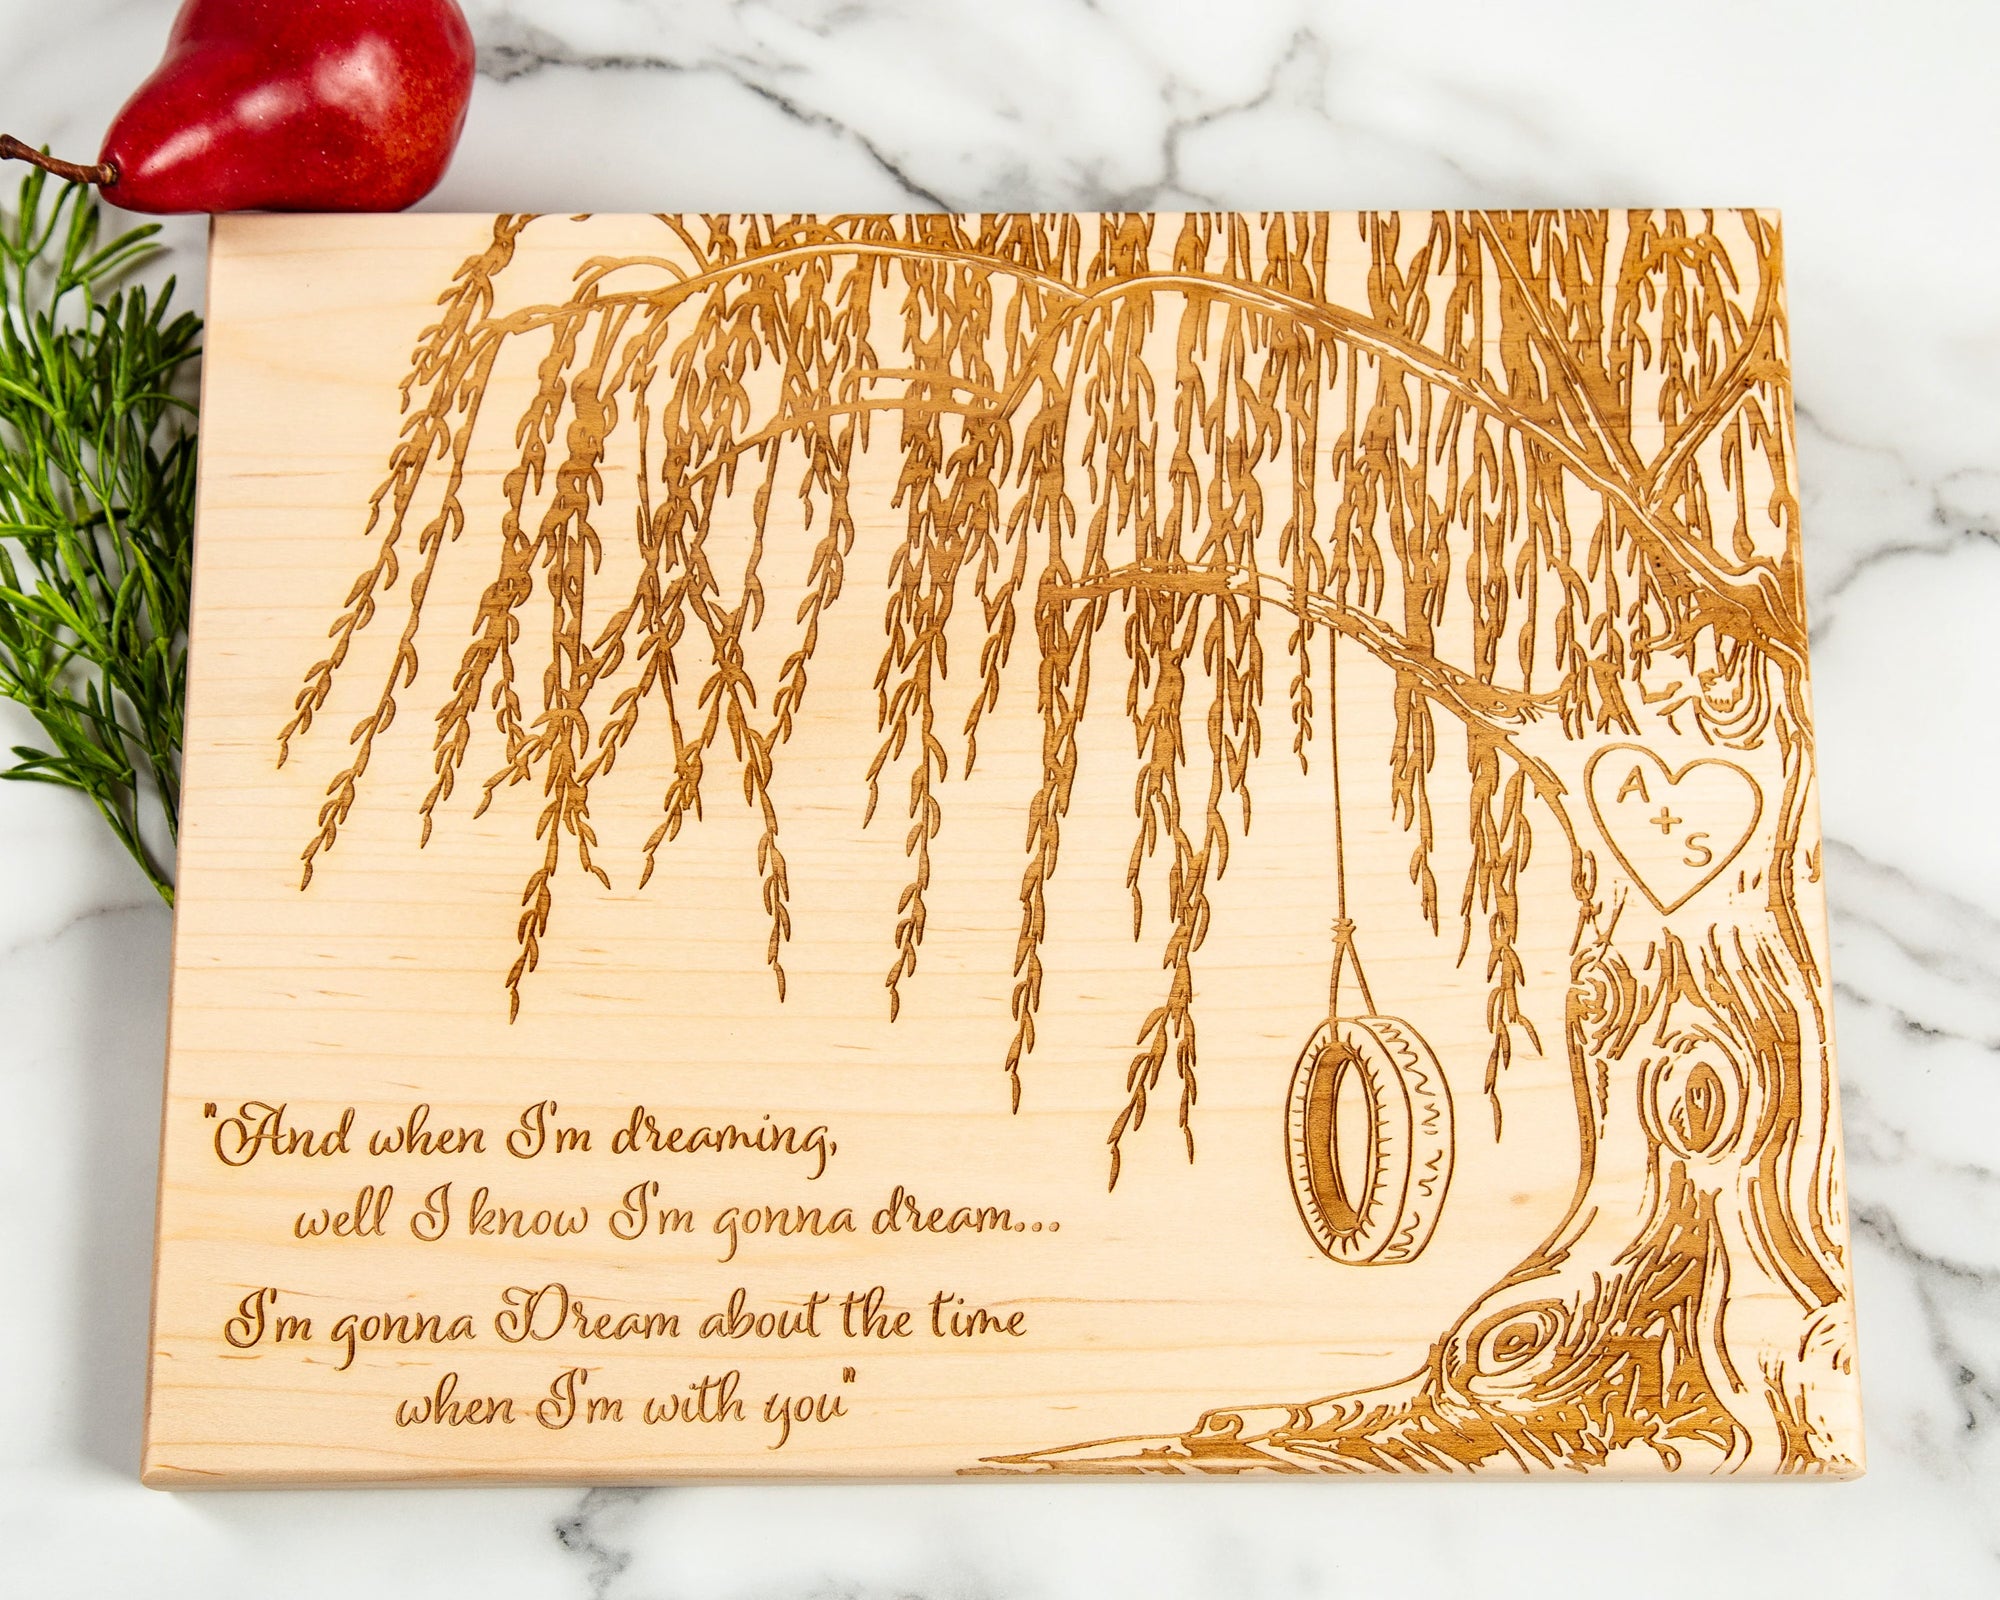 The 9th anniversary willow tree gift